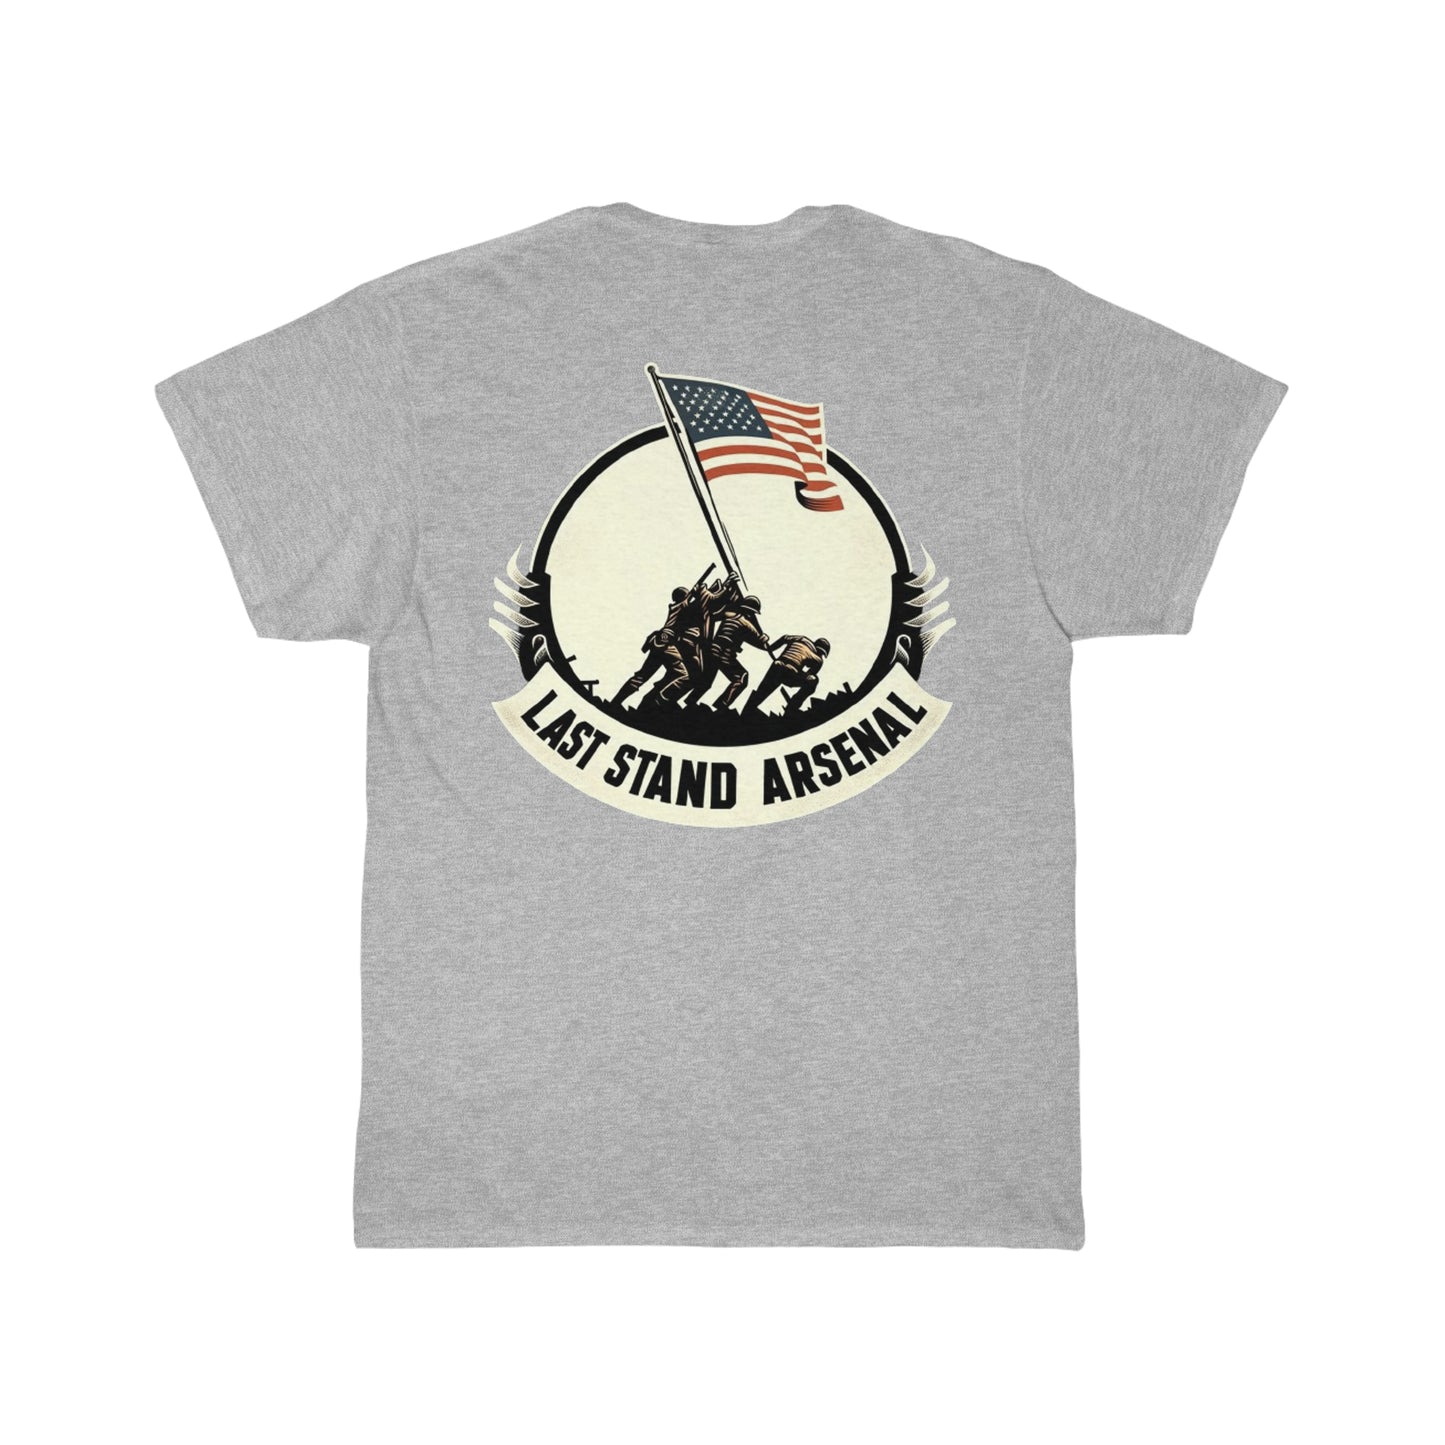 Last Stand Arsenal - All Together Tee